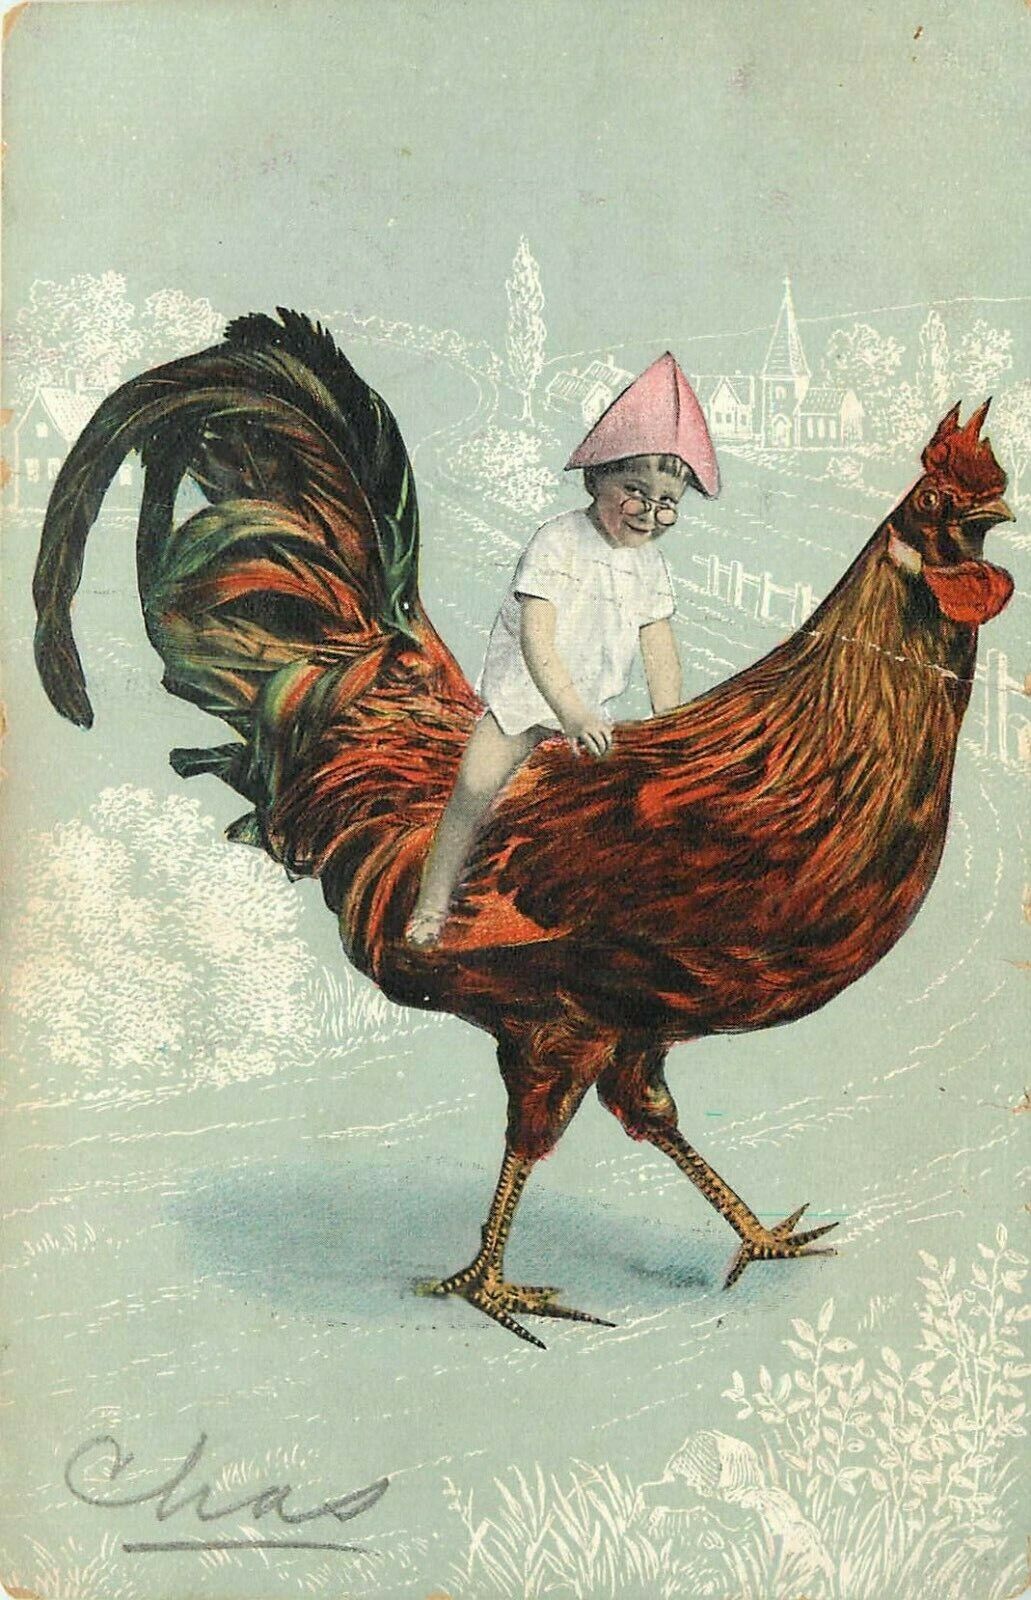 Little Girl or Boy Riding on Back of Chicken Party Hat pm 1907 Postcard